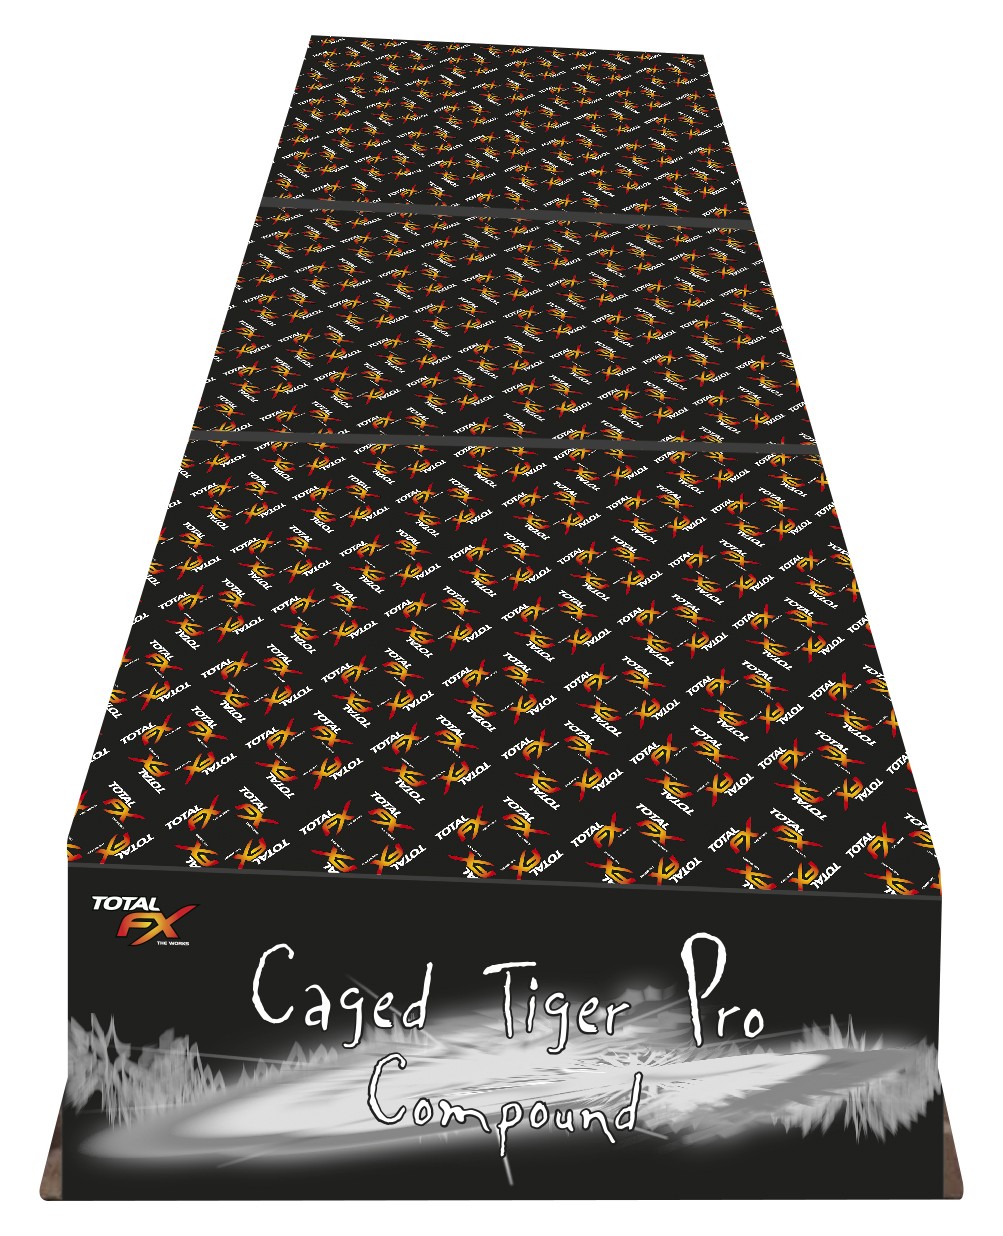 Caged Tiger Pro Compound 